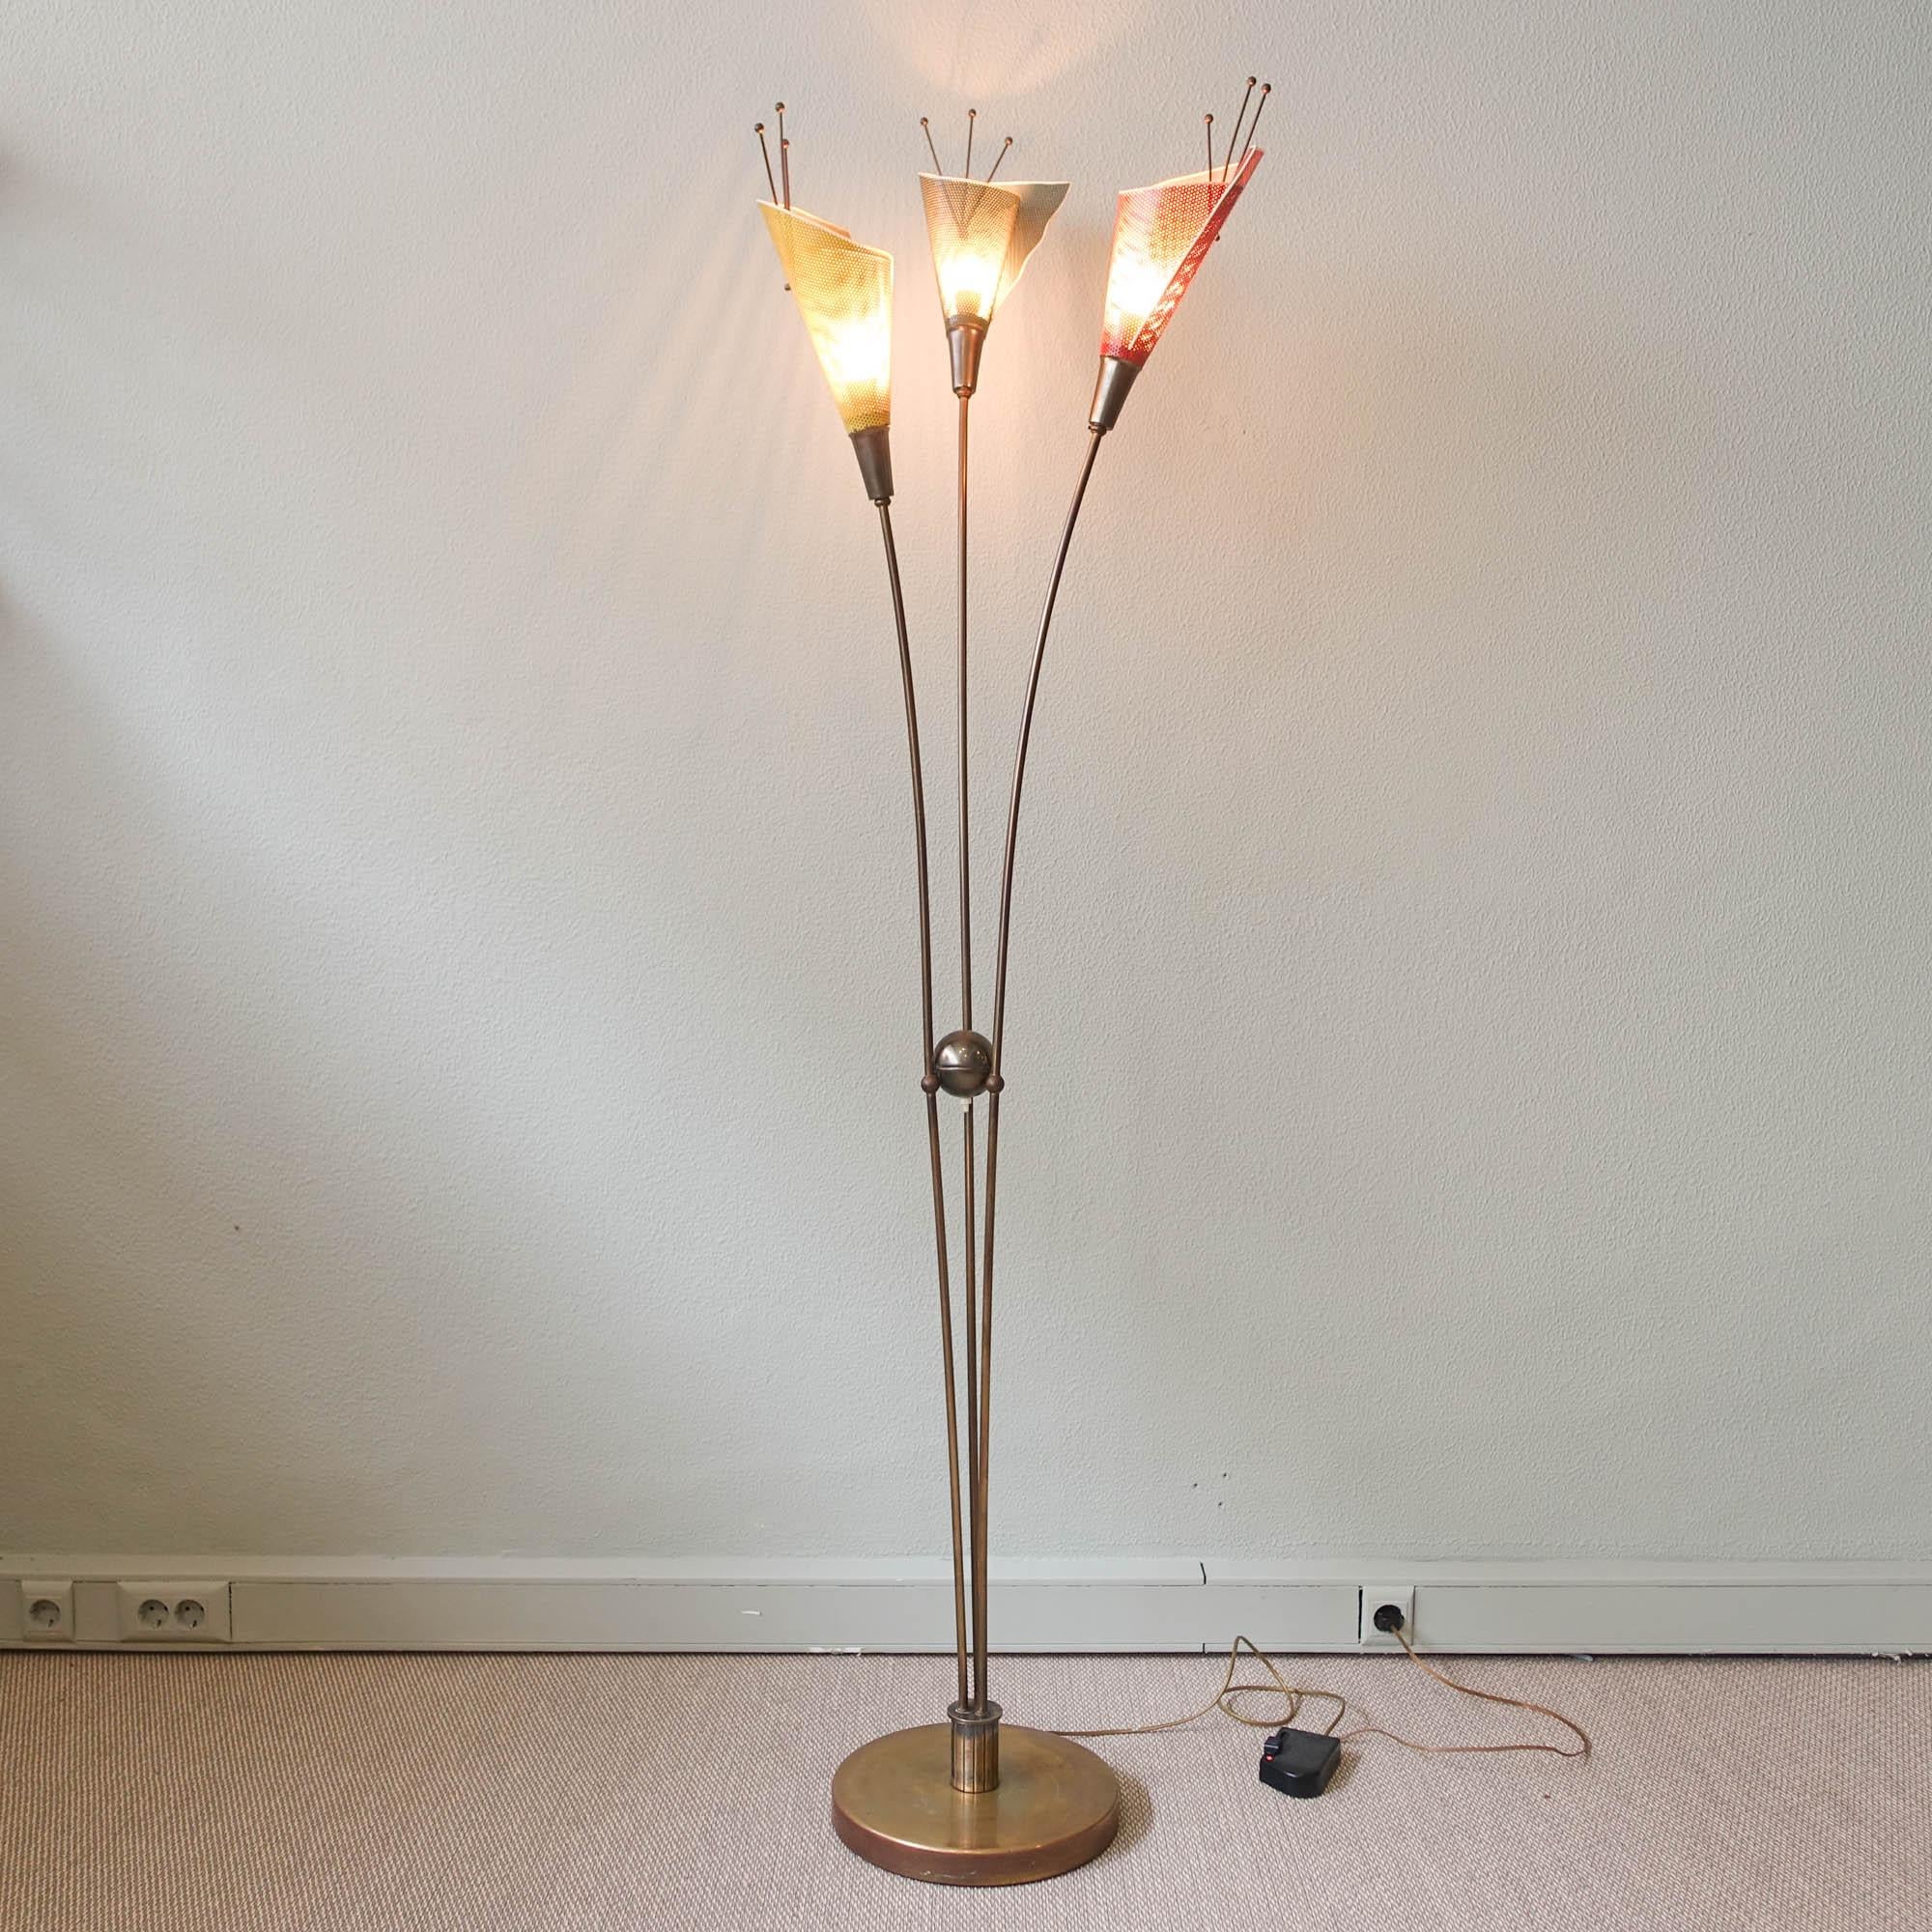 This floor lamp was designed and produced by Kobis & Lorence in France during the 1950's. It has three perforated metal shades, in red, green and yellow, in a flower shape that are attached to a brass arm. With an organic design, very typical from